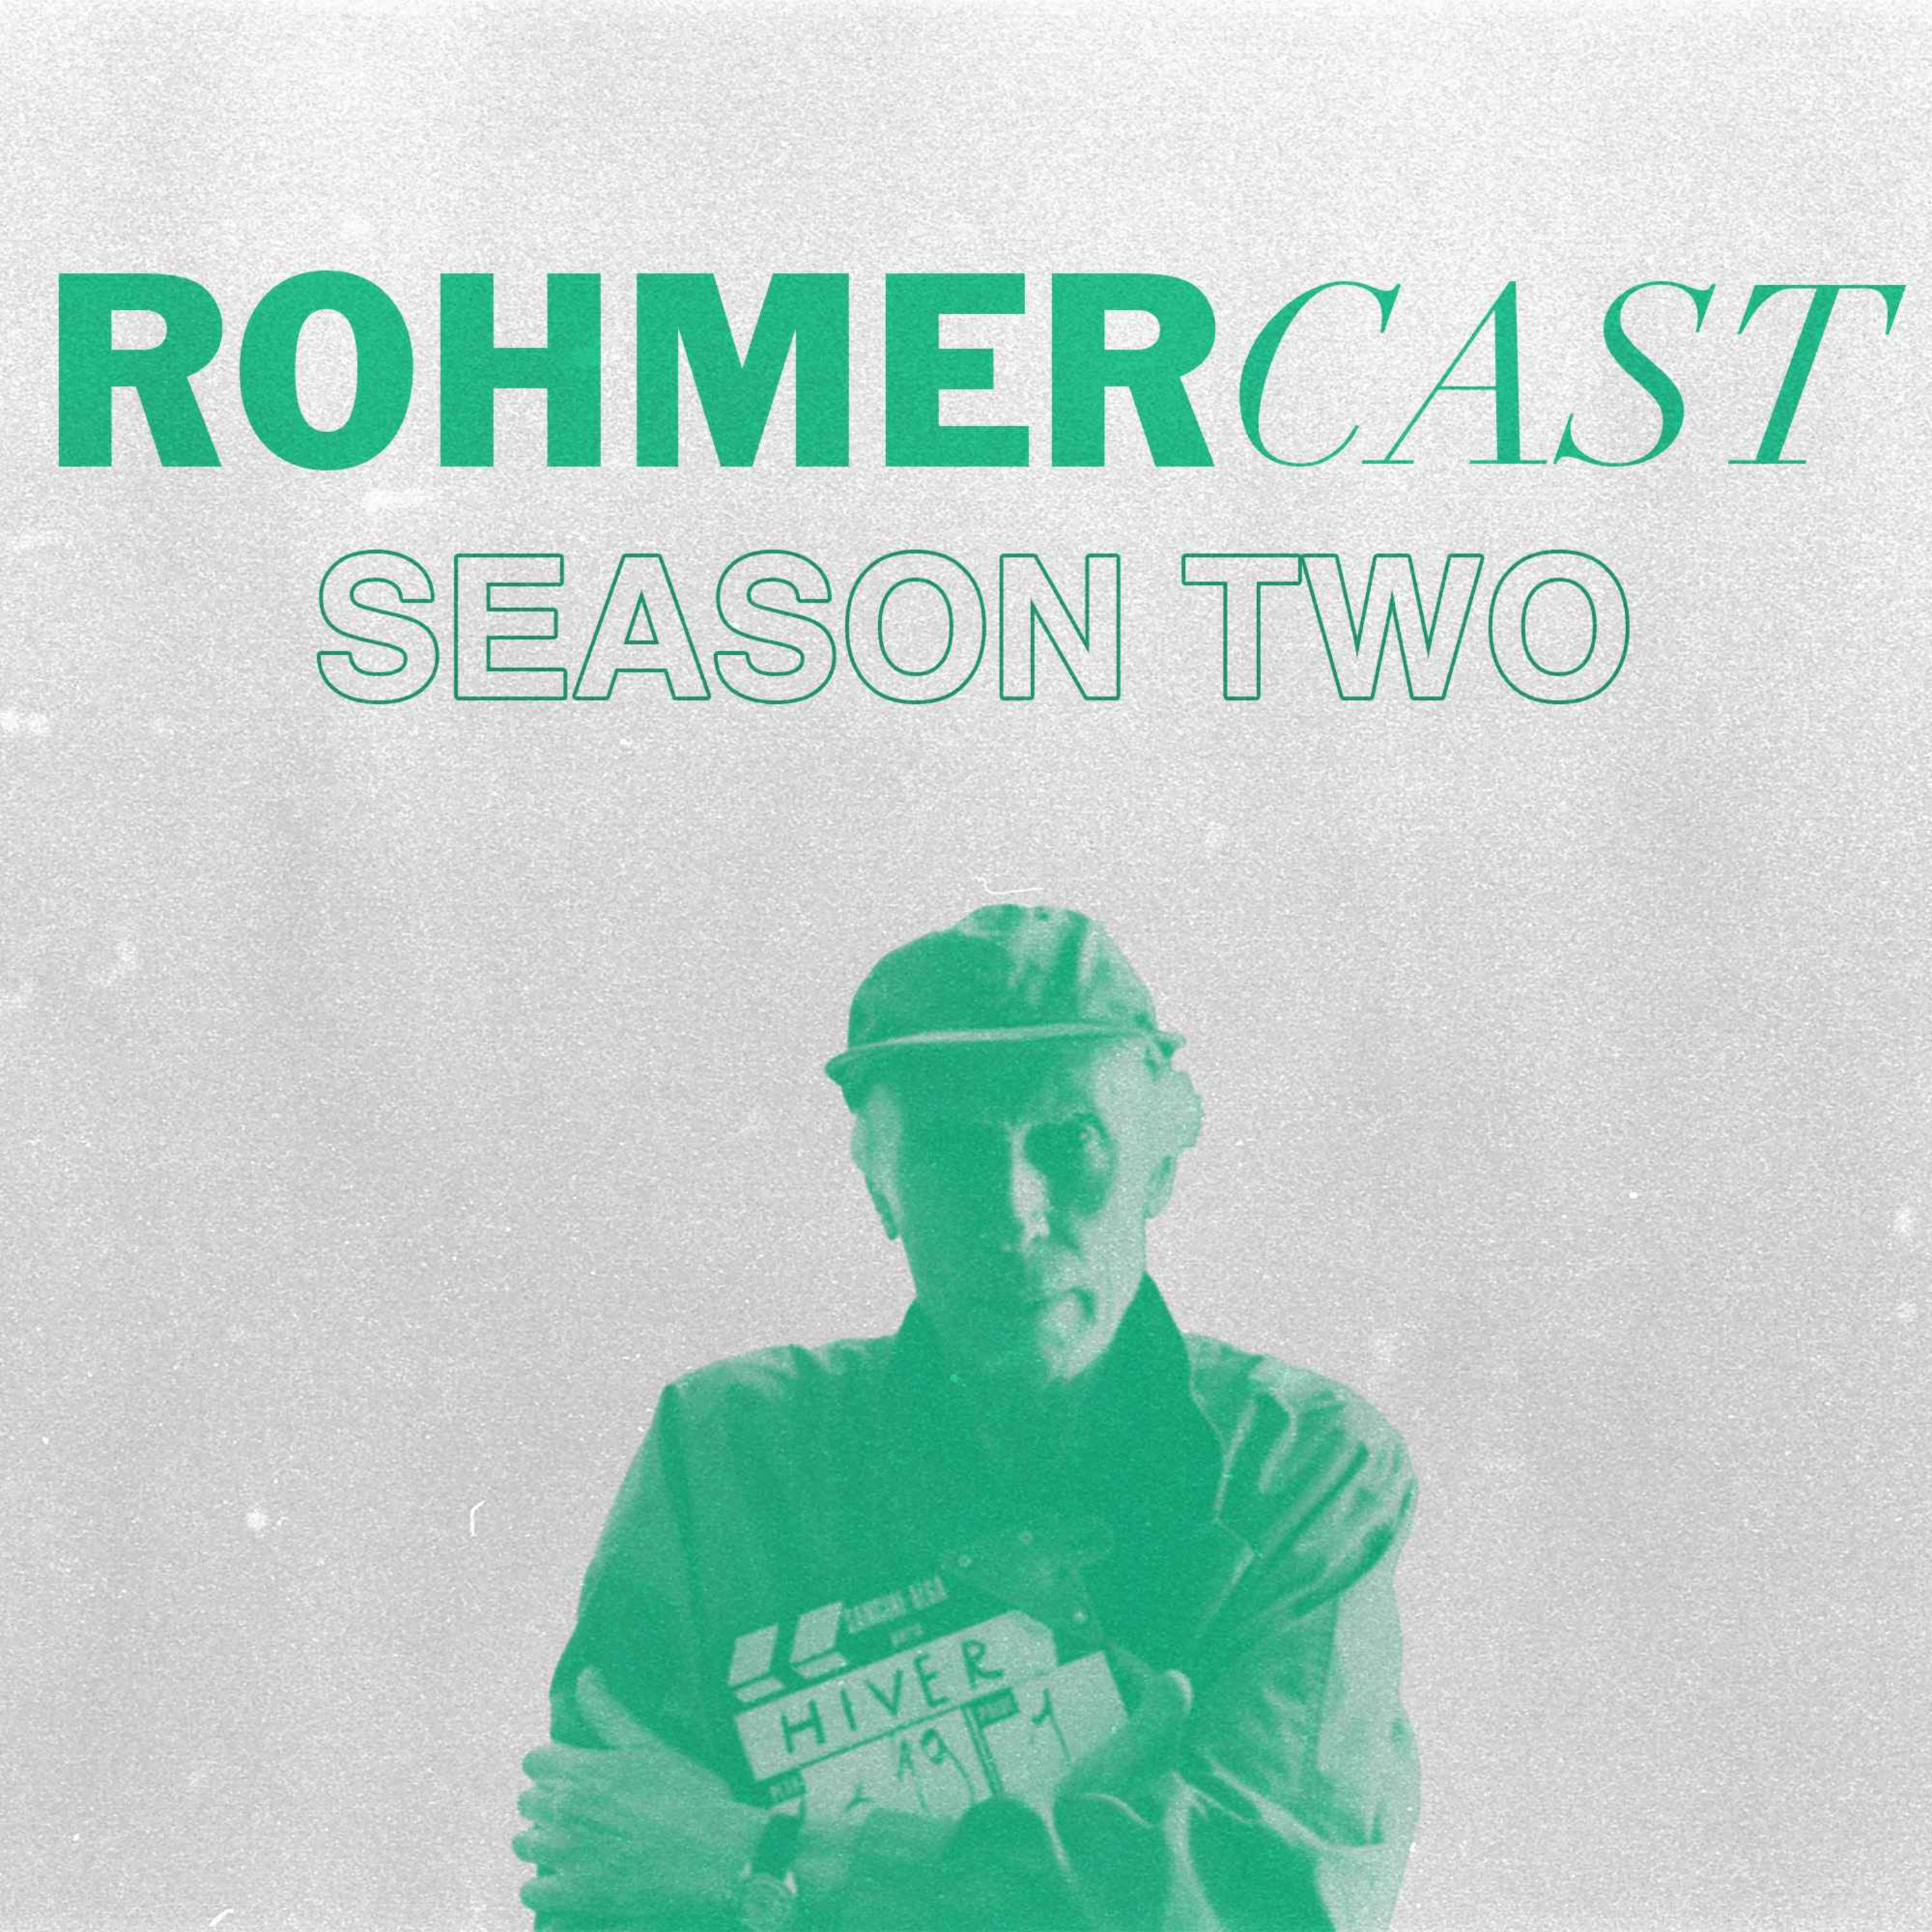 ANNOUNCING OUR SECOND SEASON!